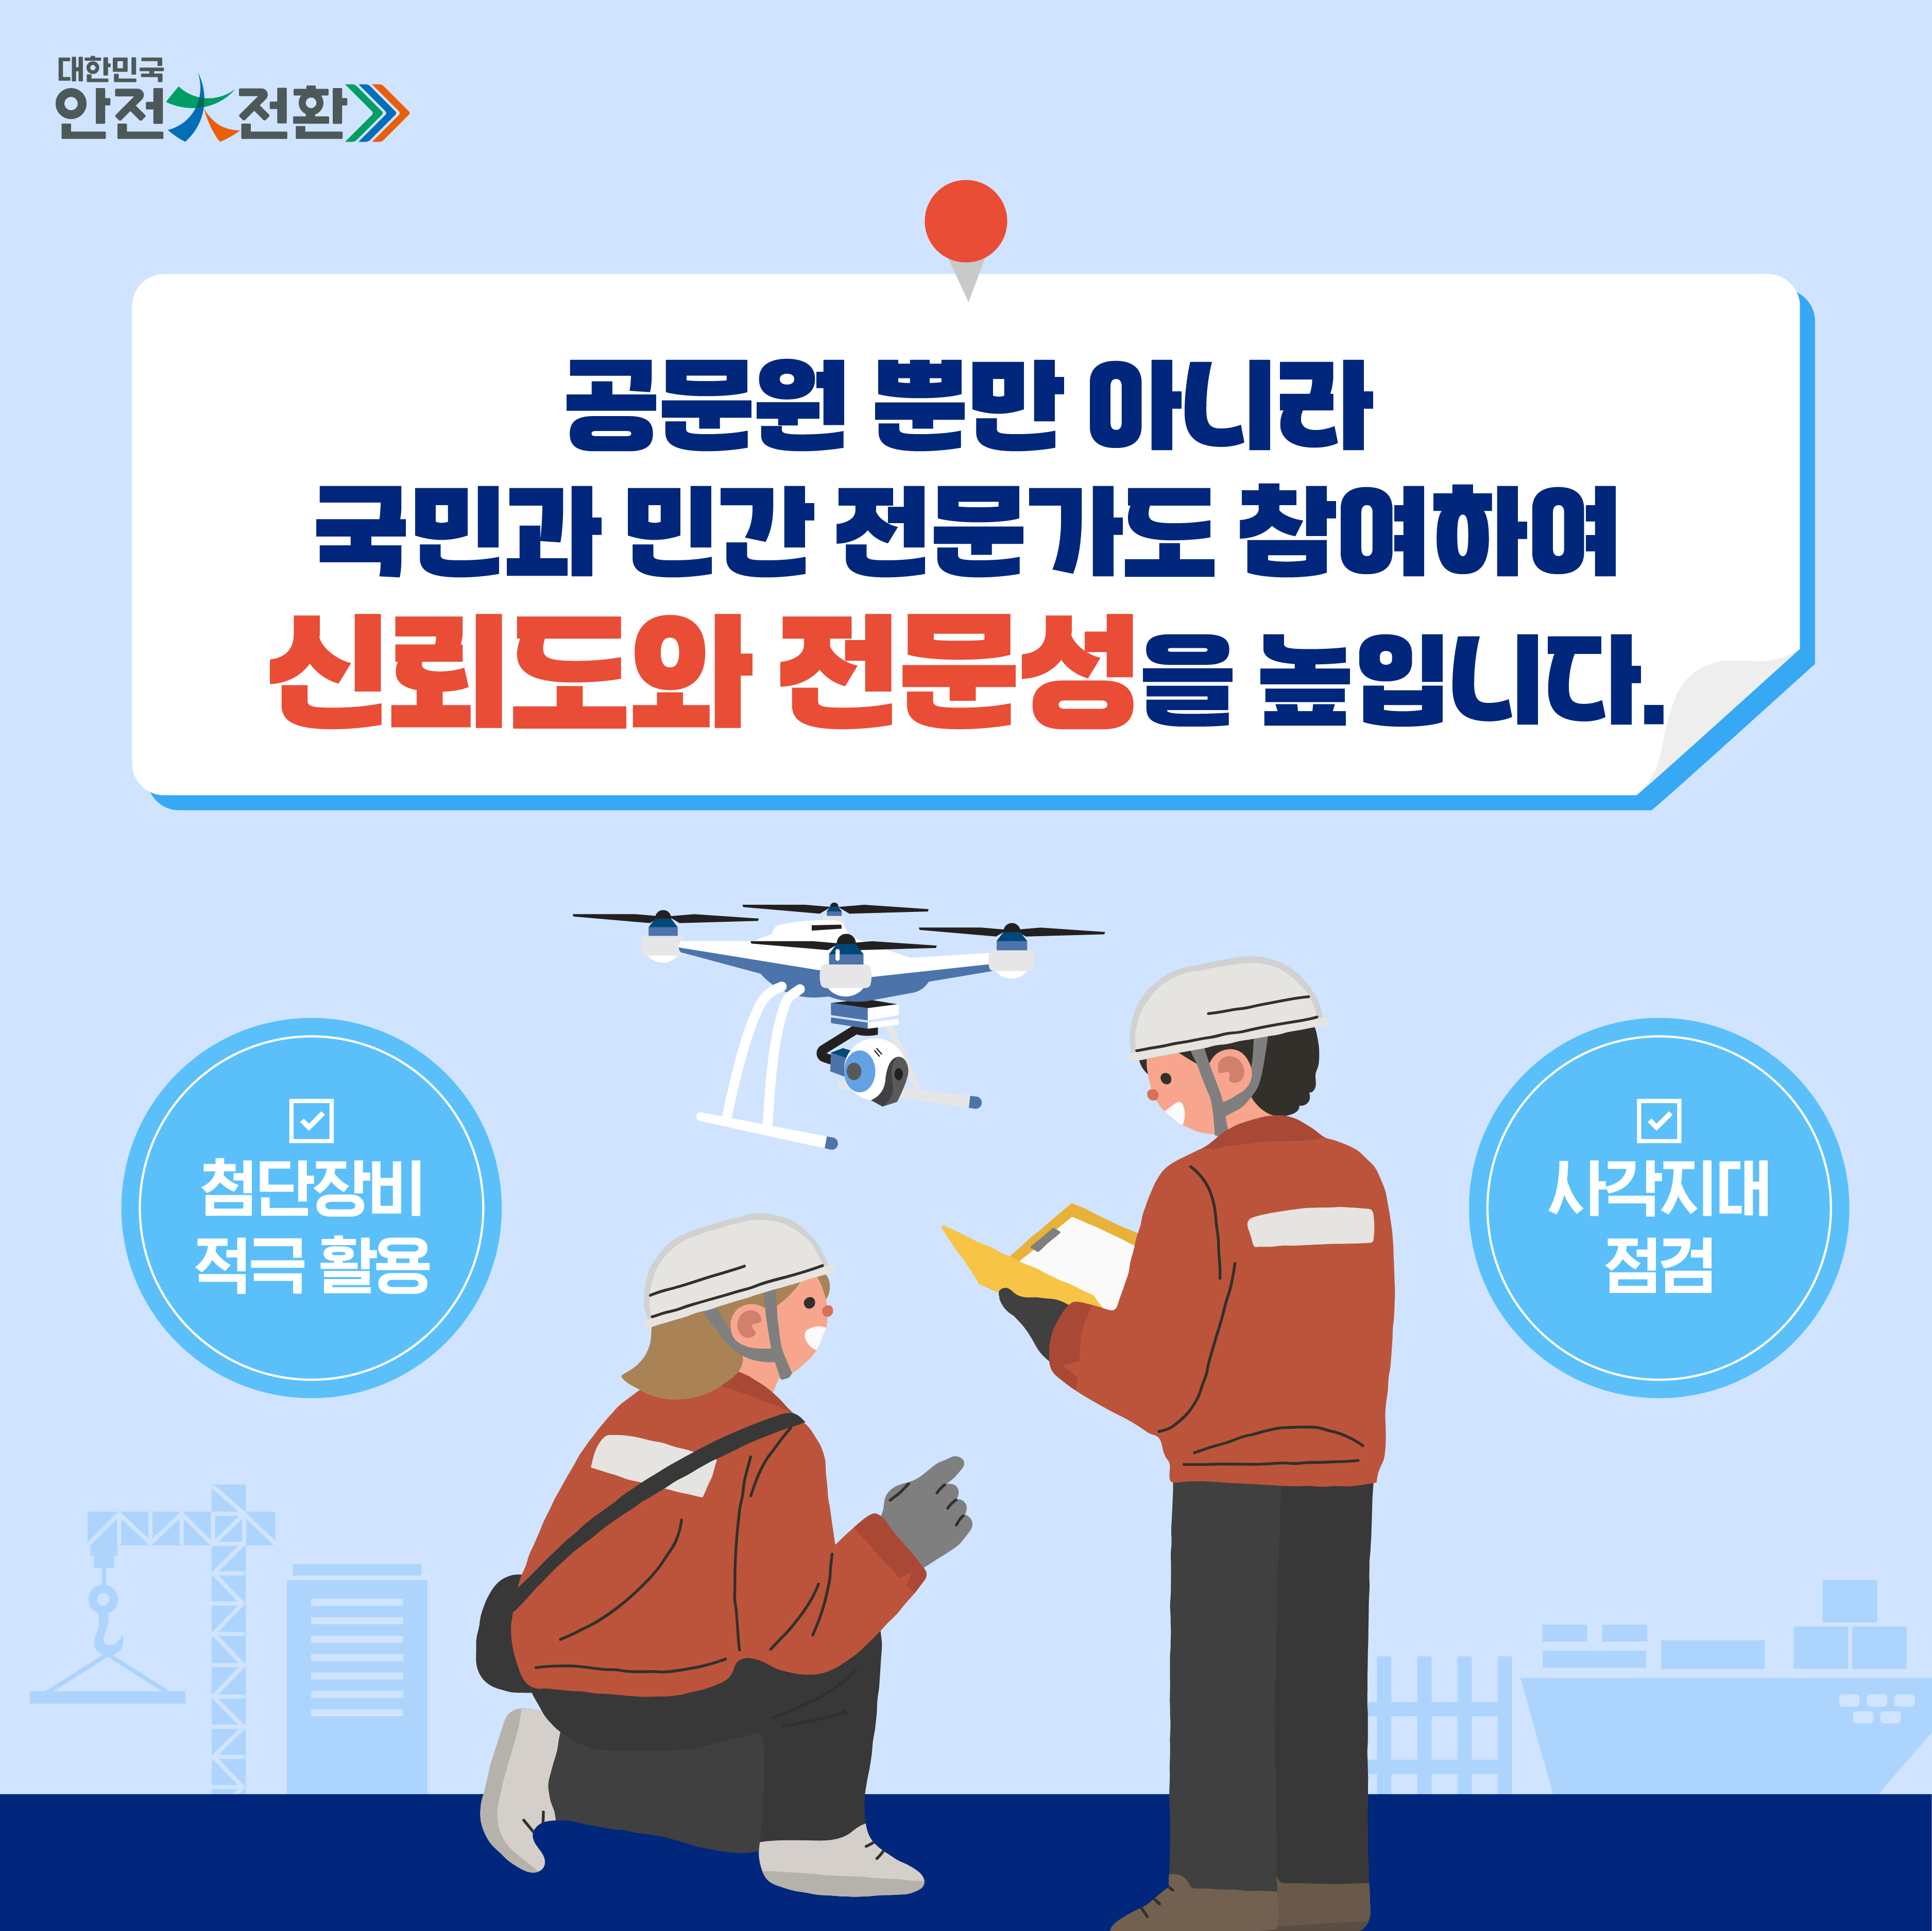 https://www.komsa.or.kr/kor/;jsessionid=CCED23CE9A5AC2BC971BE2B53D72A007